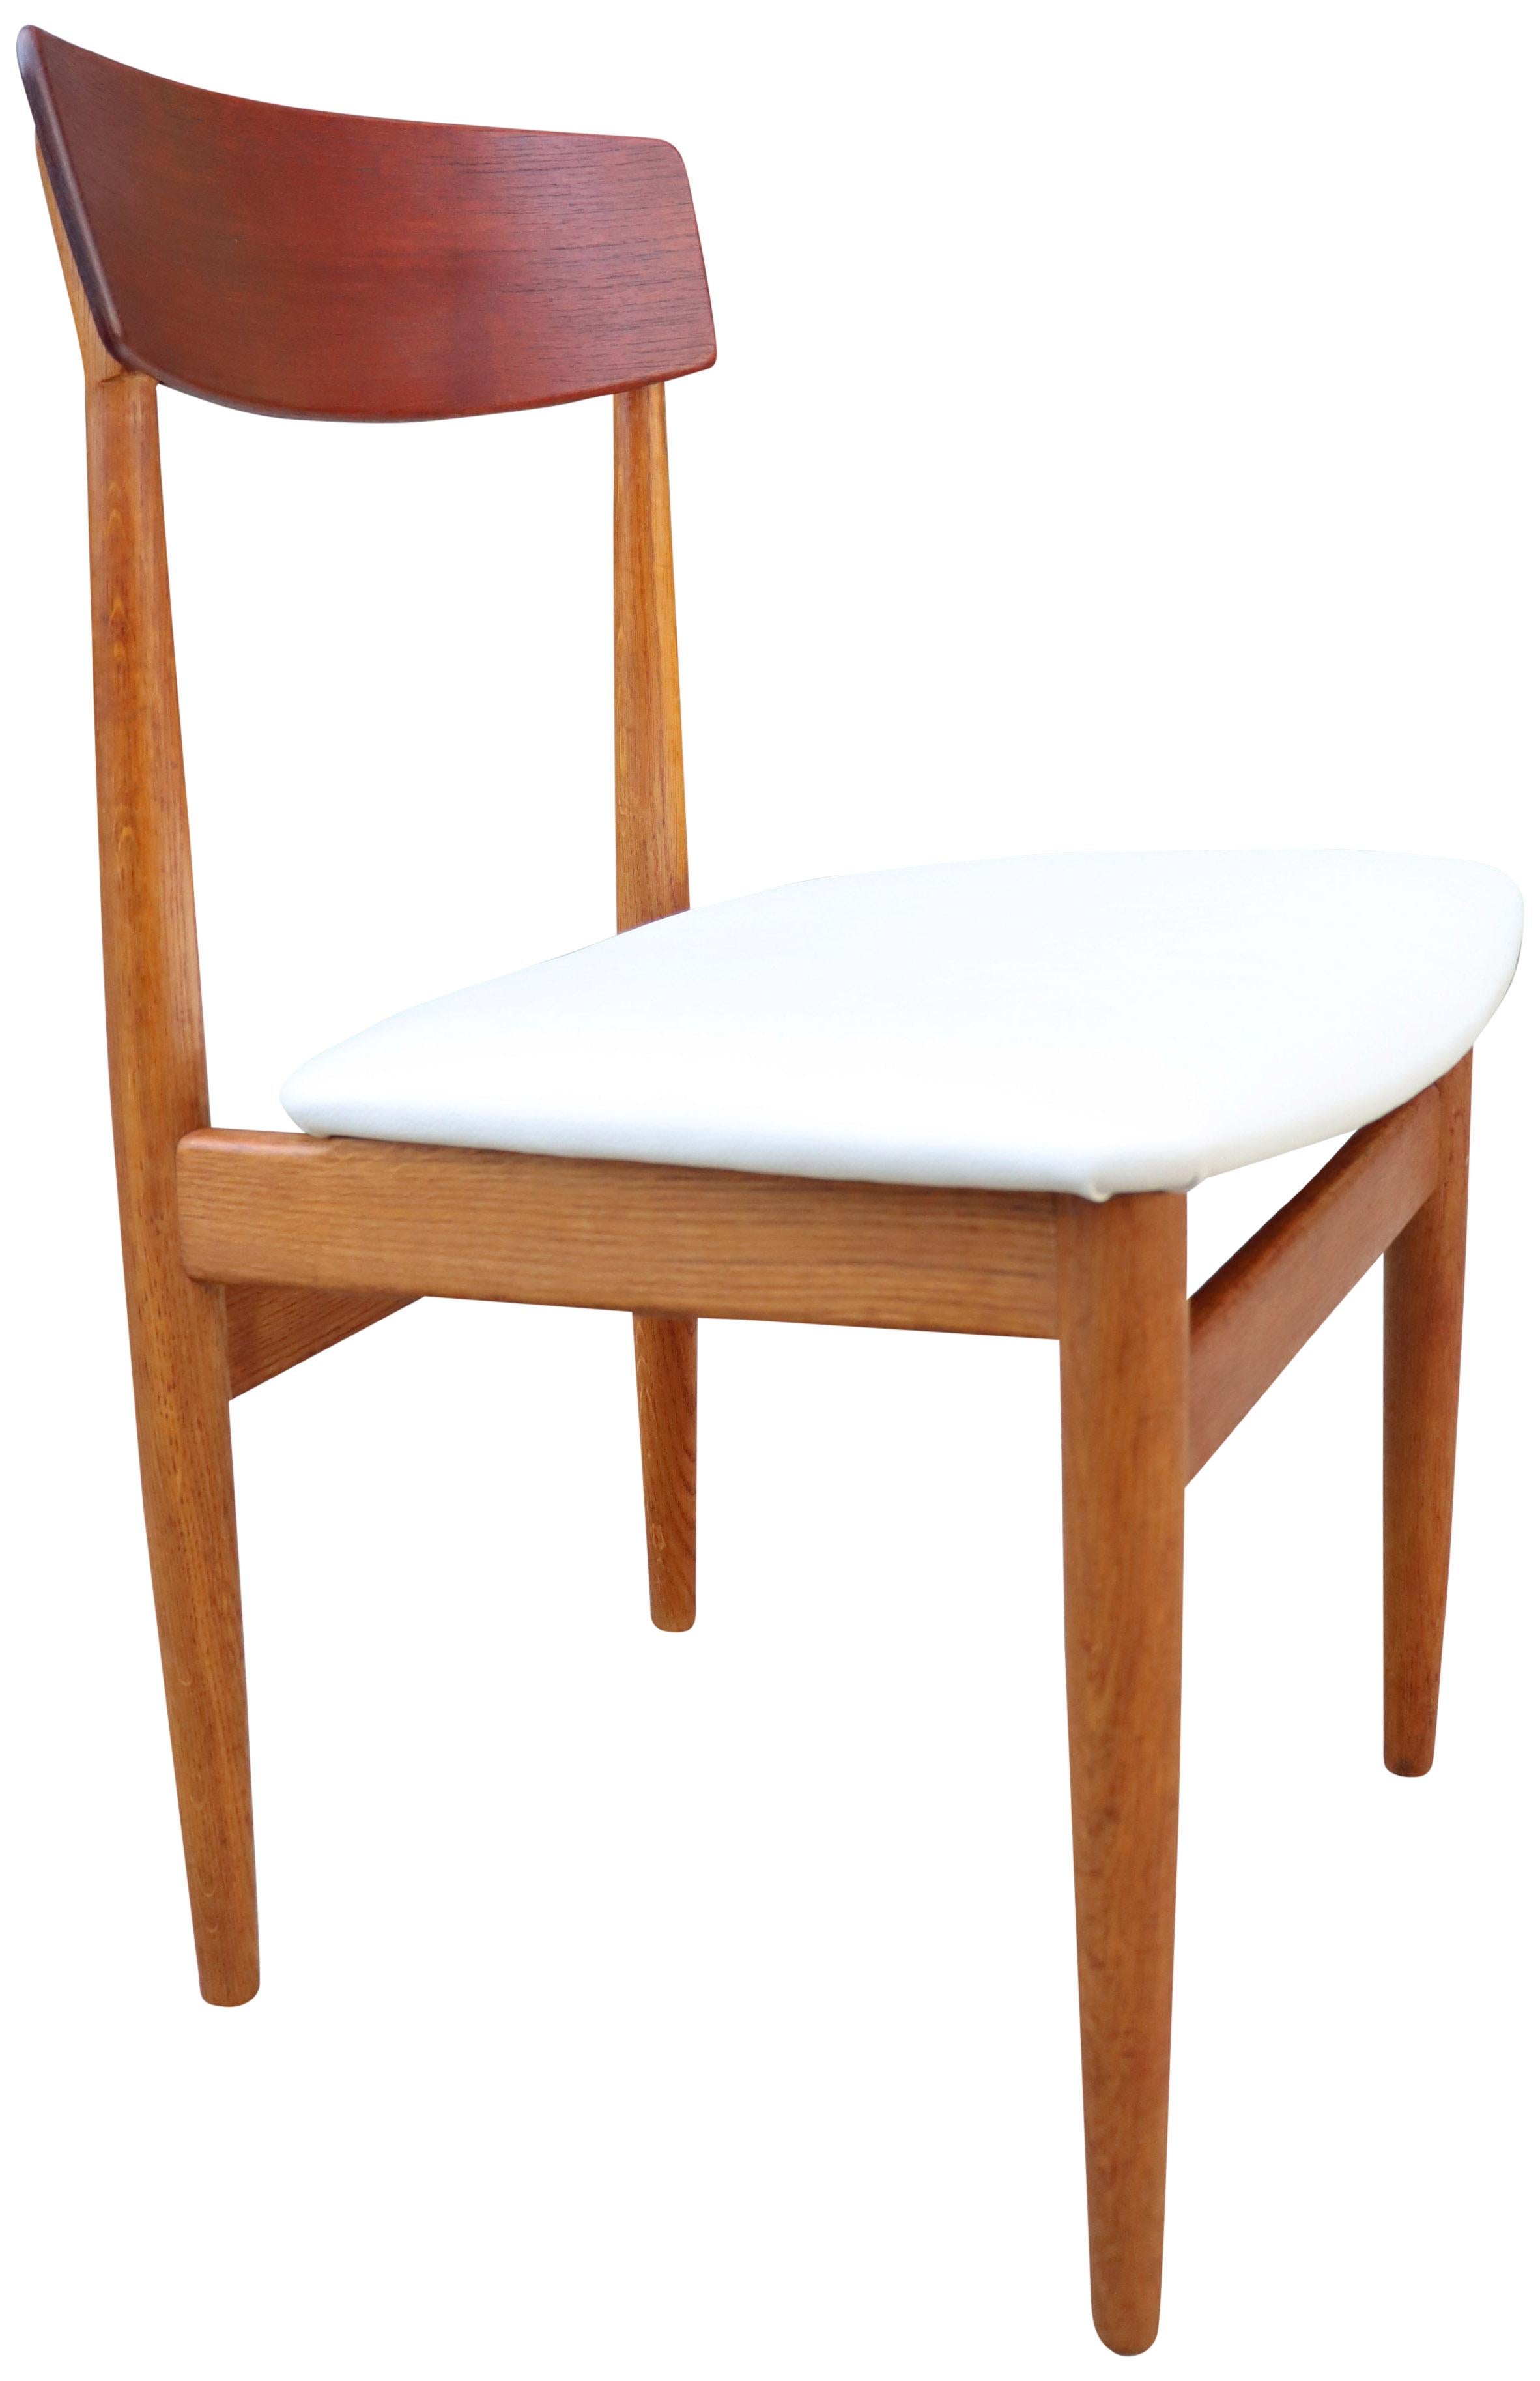 Leather Midcentury Scandinavian Dining Chairs